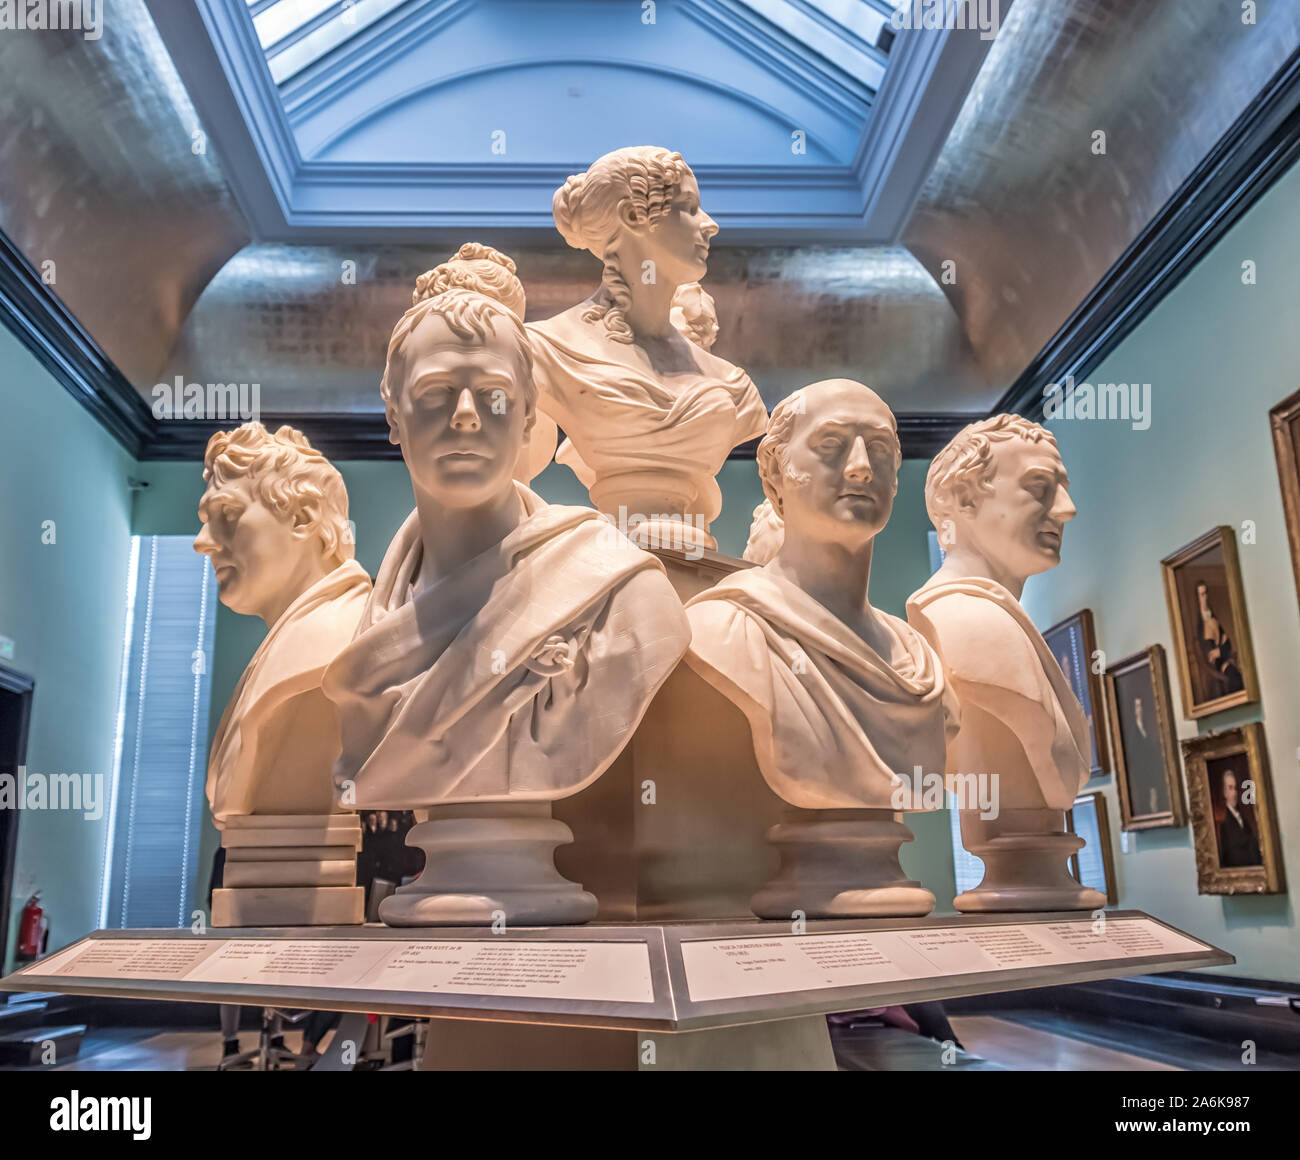 A group of Regency / Georgian / Victorian Marble Busts or Sculptures, National Portrait Gallery, London, UK - Shown in dramatic, overhead lighting Stock Photo